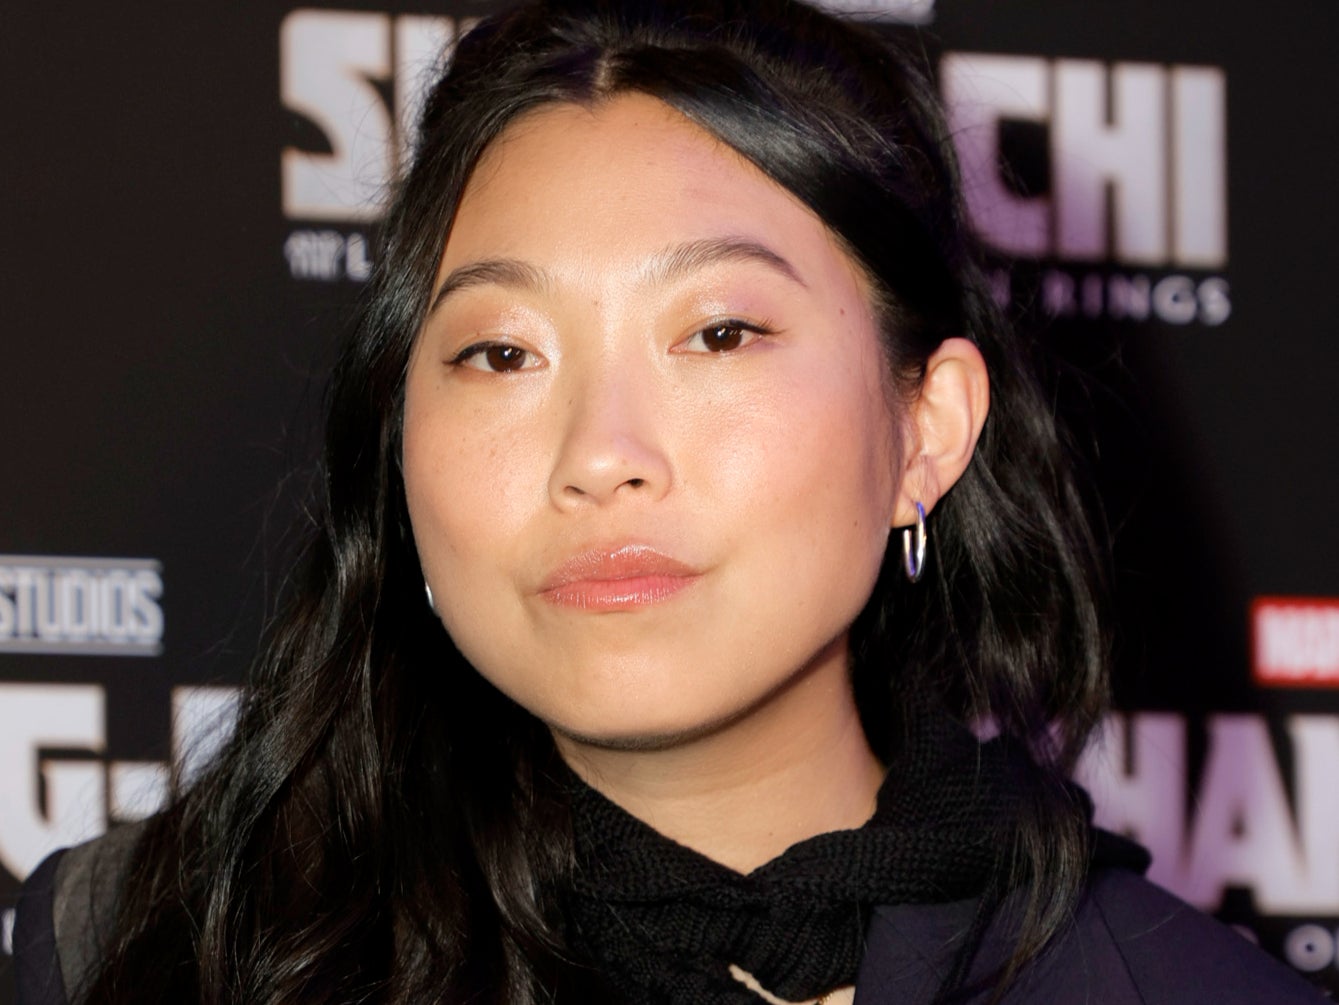 ‘Shang-Chi’ star Awkwafina has been called out for her ‘non-apology’ statement